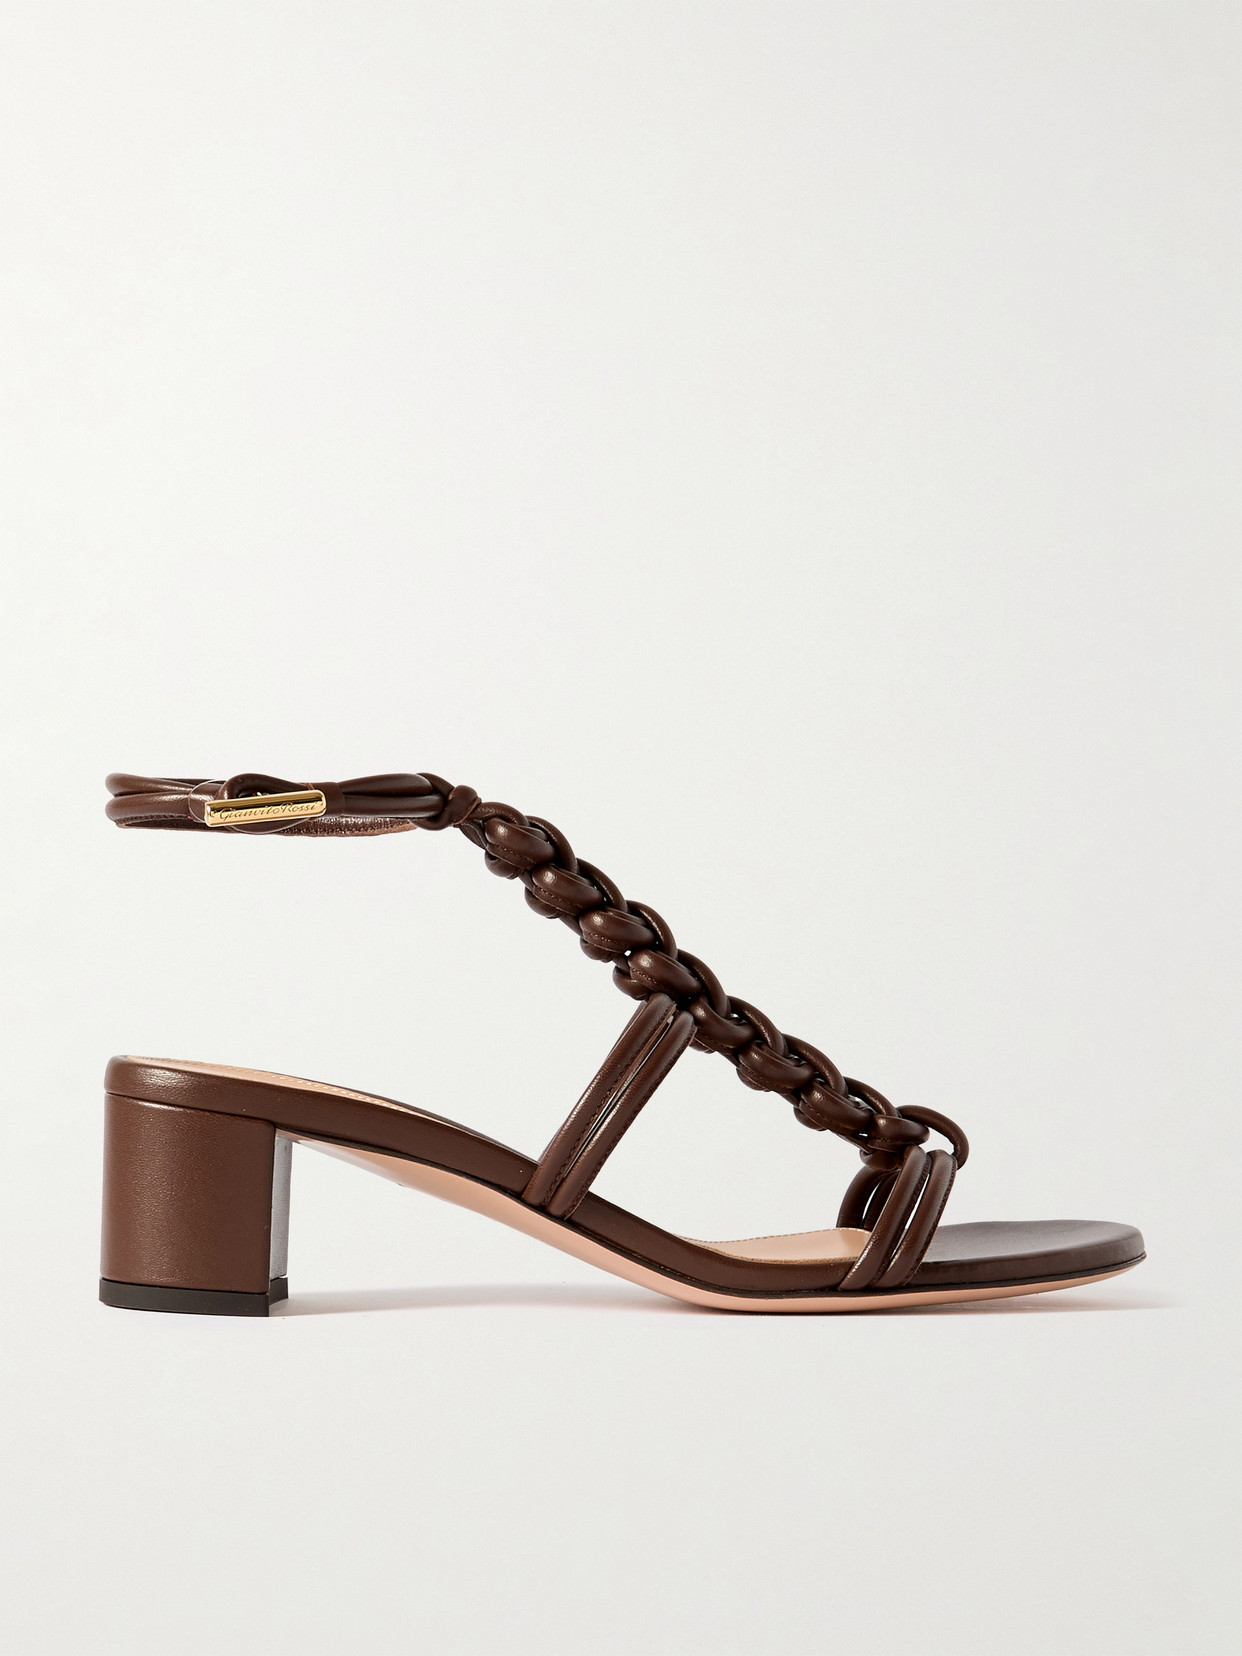 45 Woven Leather Sandals